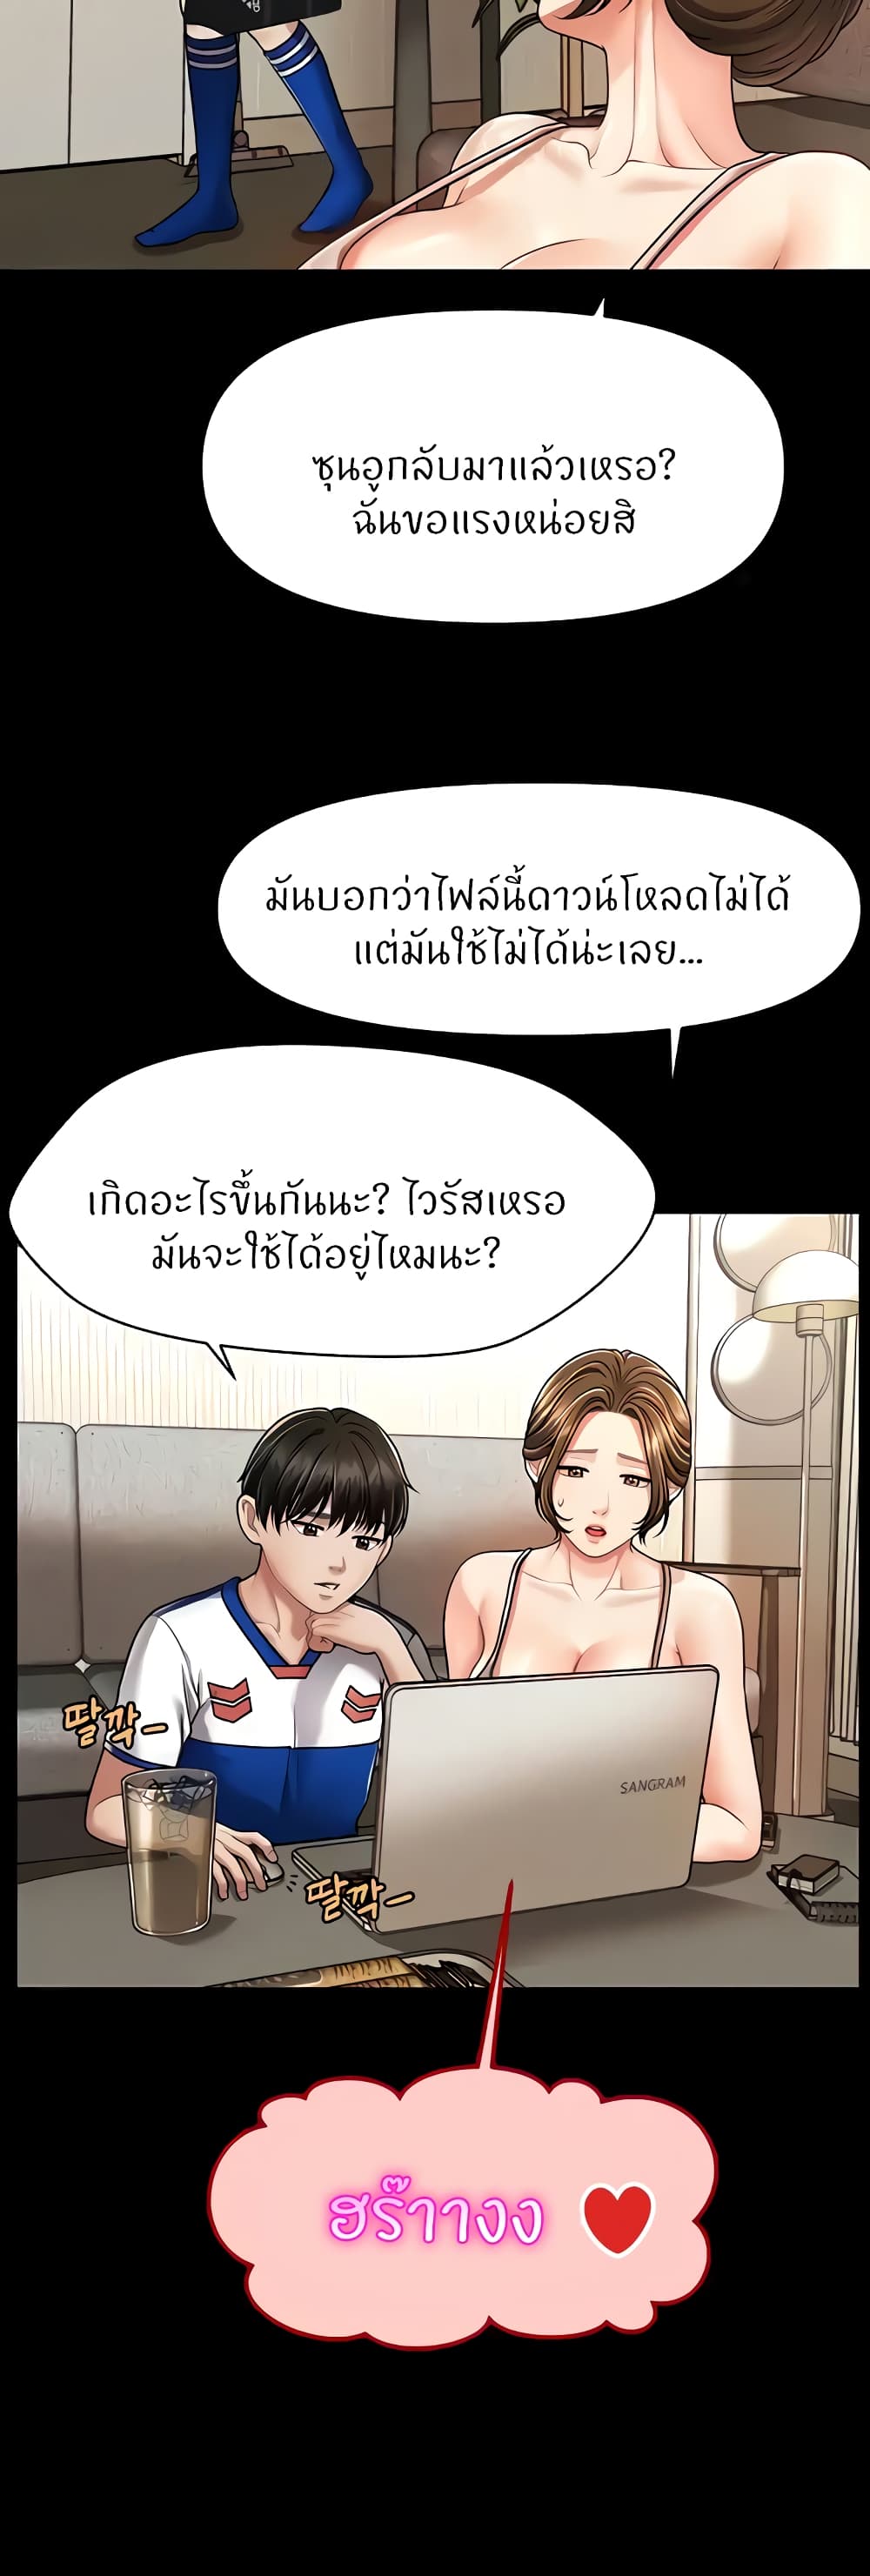 How to Conquer Women with Hypnosis ตอนที่ 4 ภาพ 2